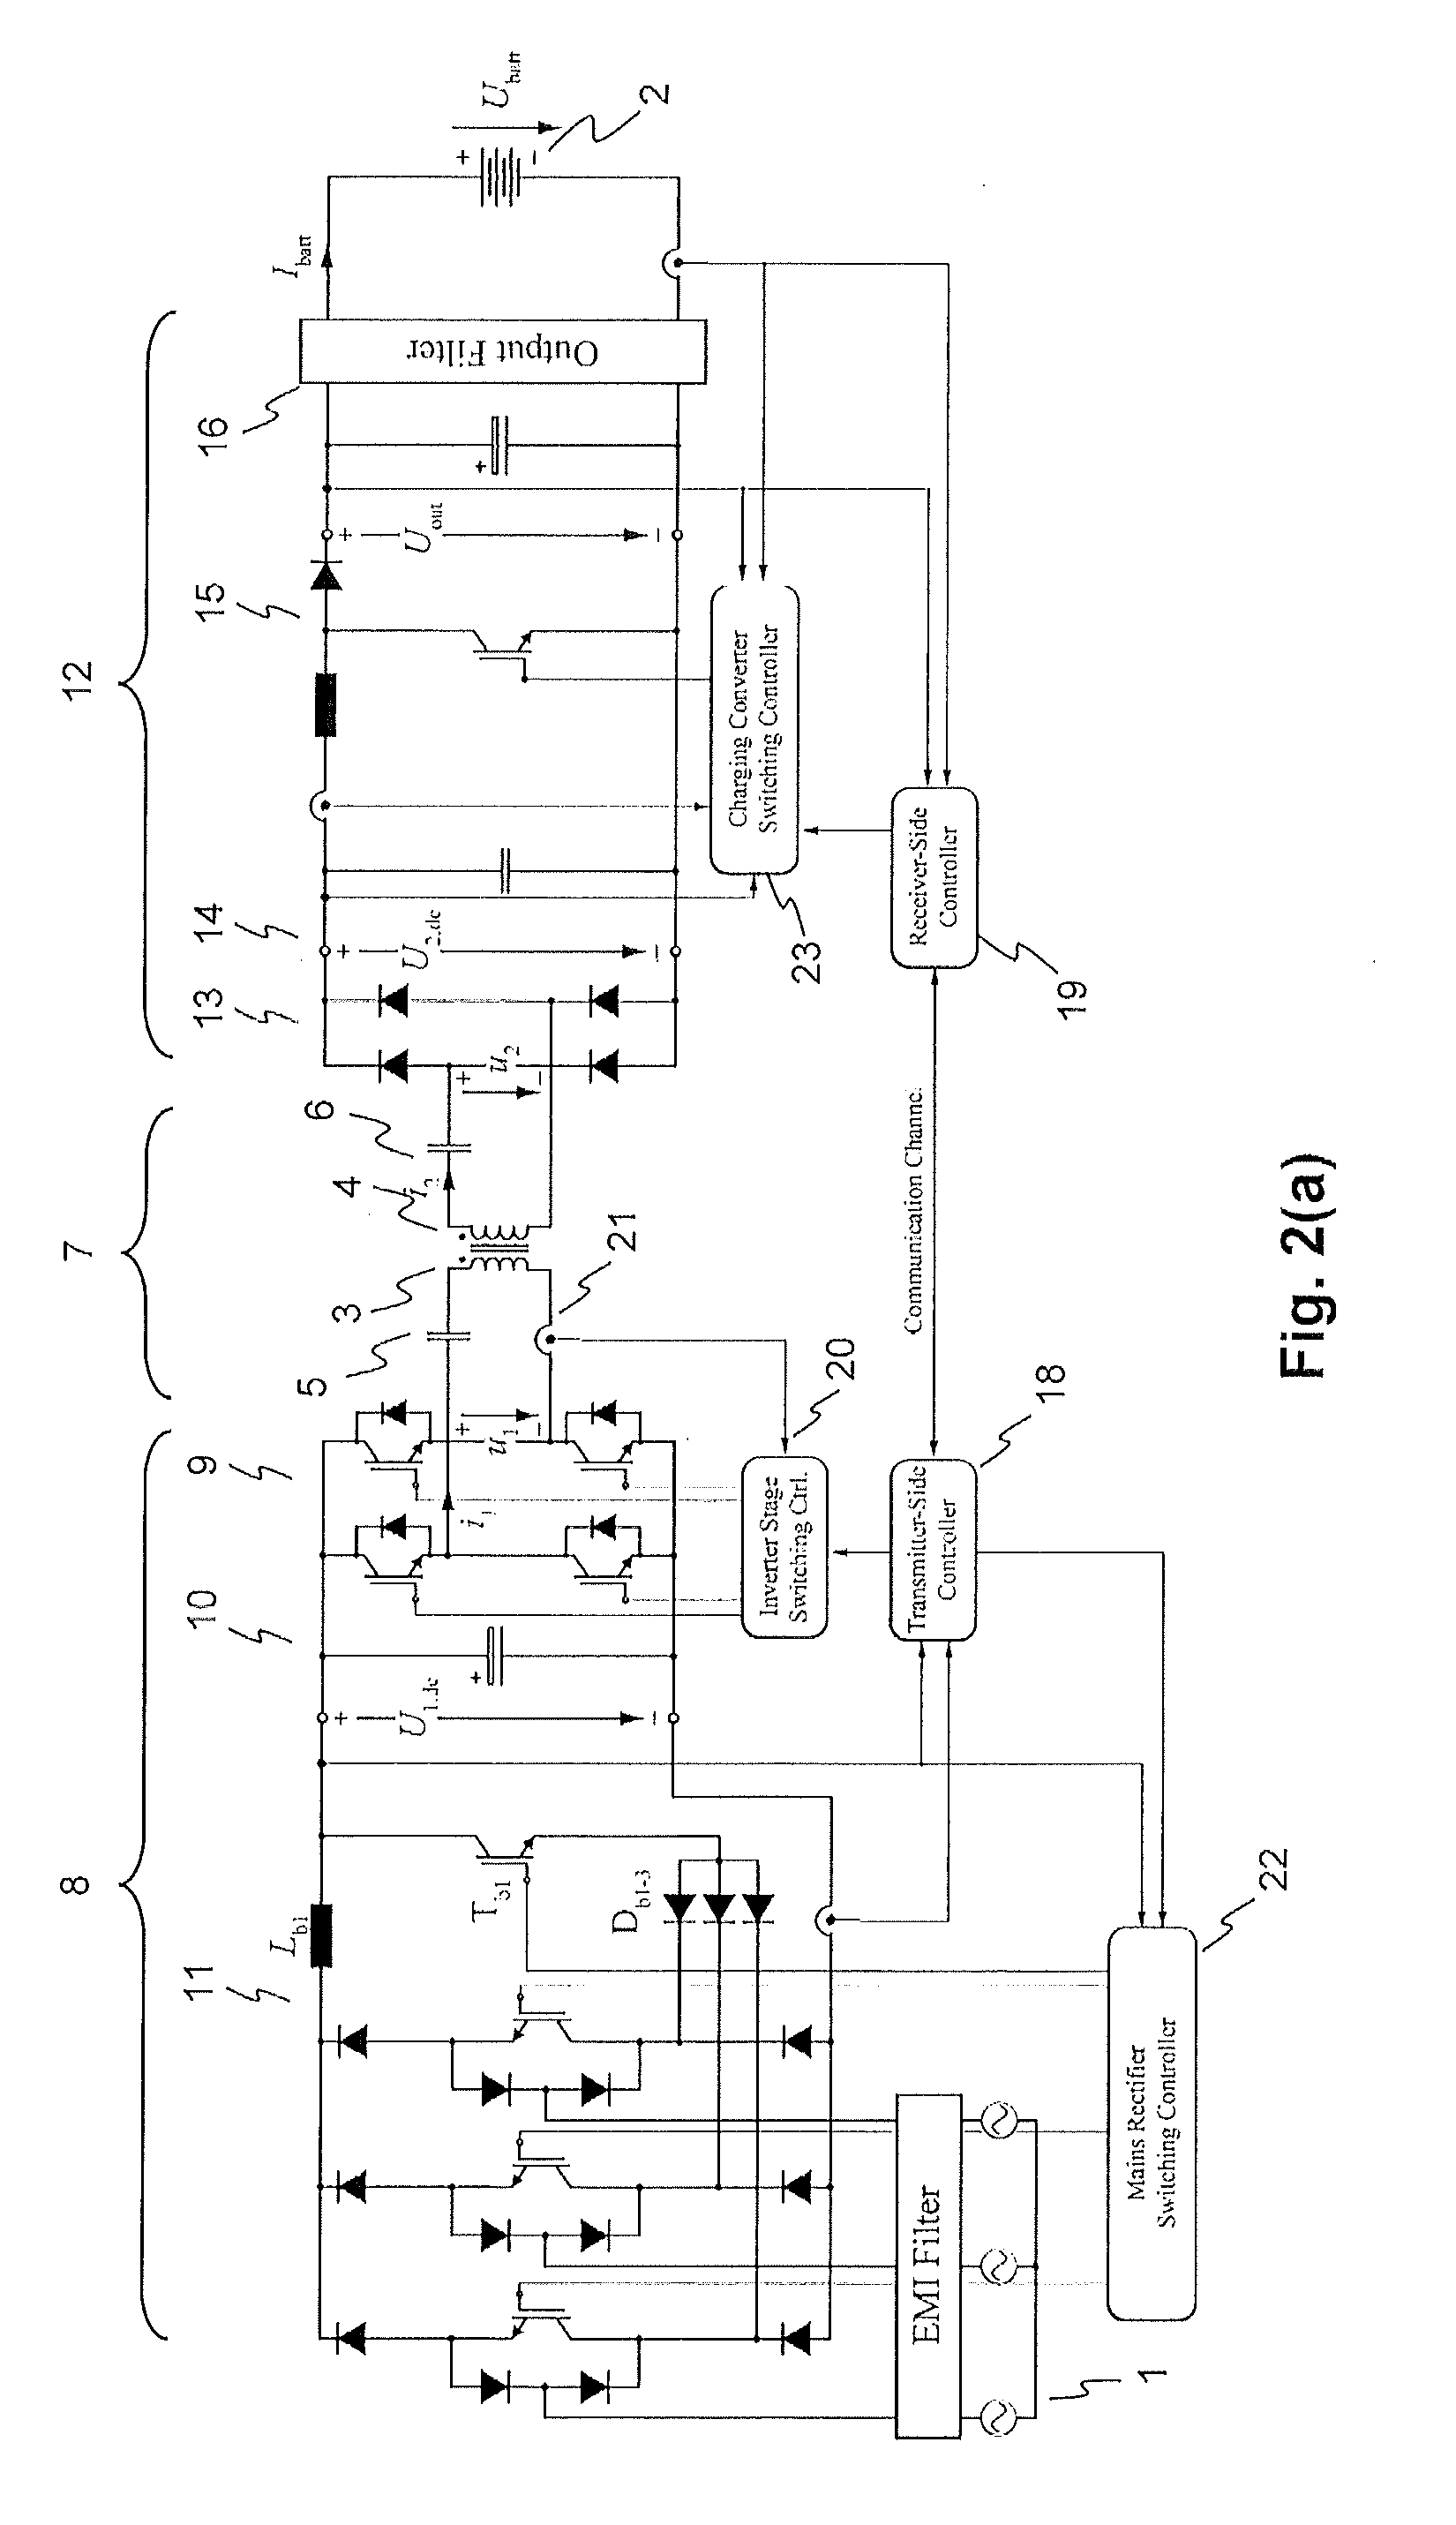 Inductive power transfer system and method for operating an inductive power transfer system